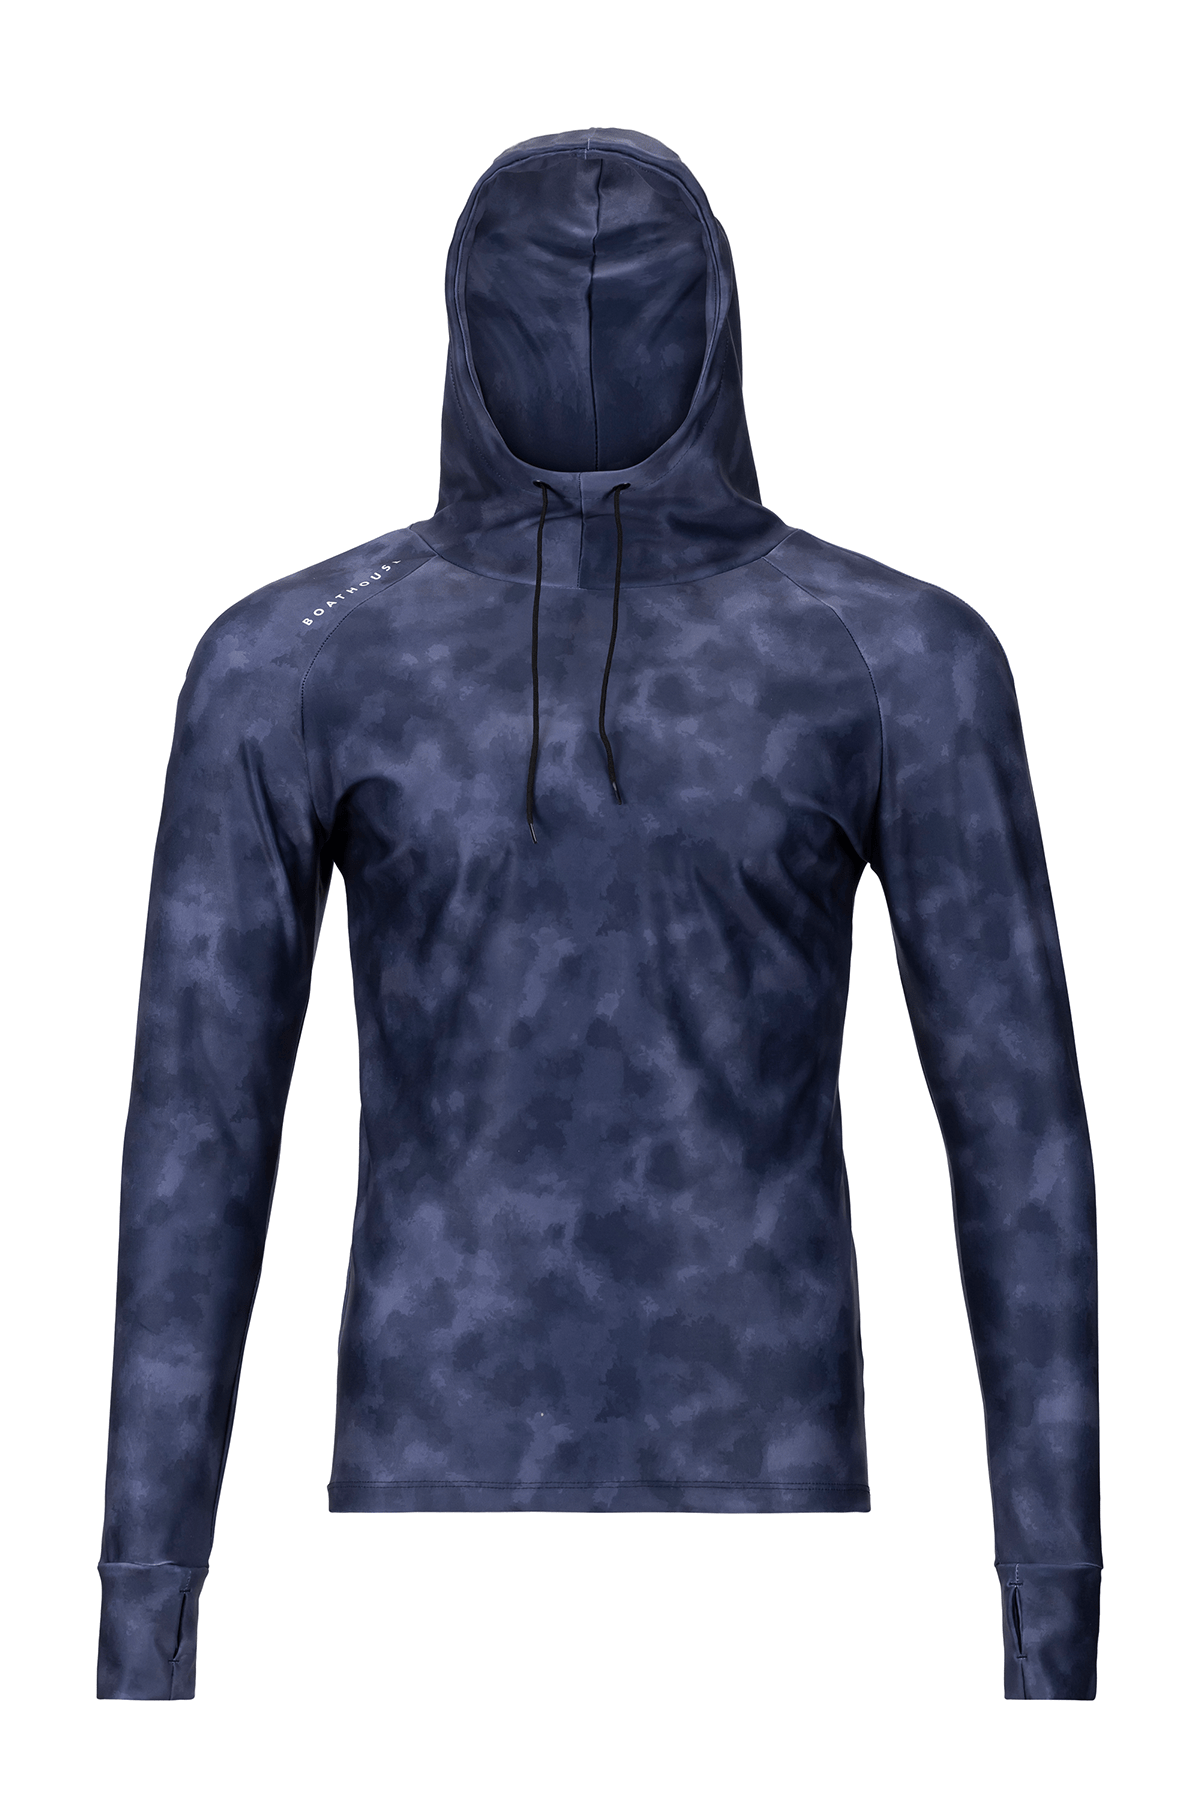 Men's Denim Wash Hooded Compression Top Navy / Small